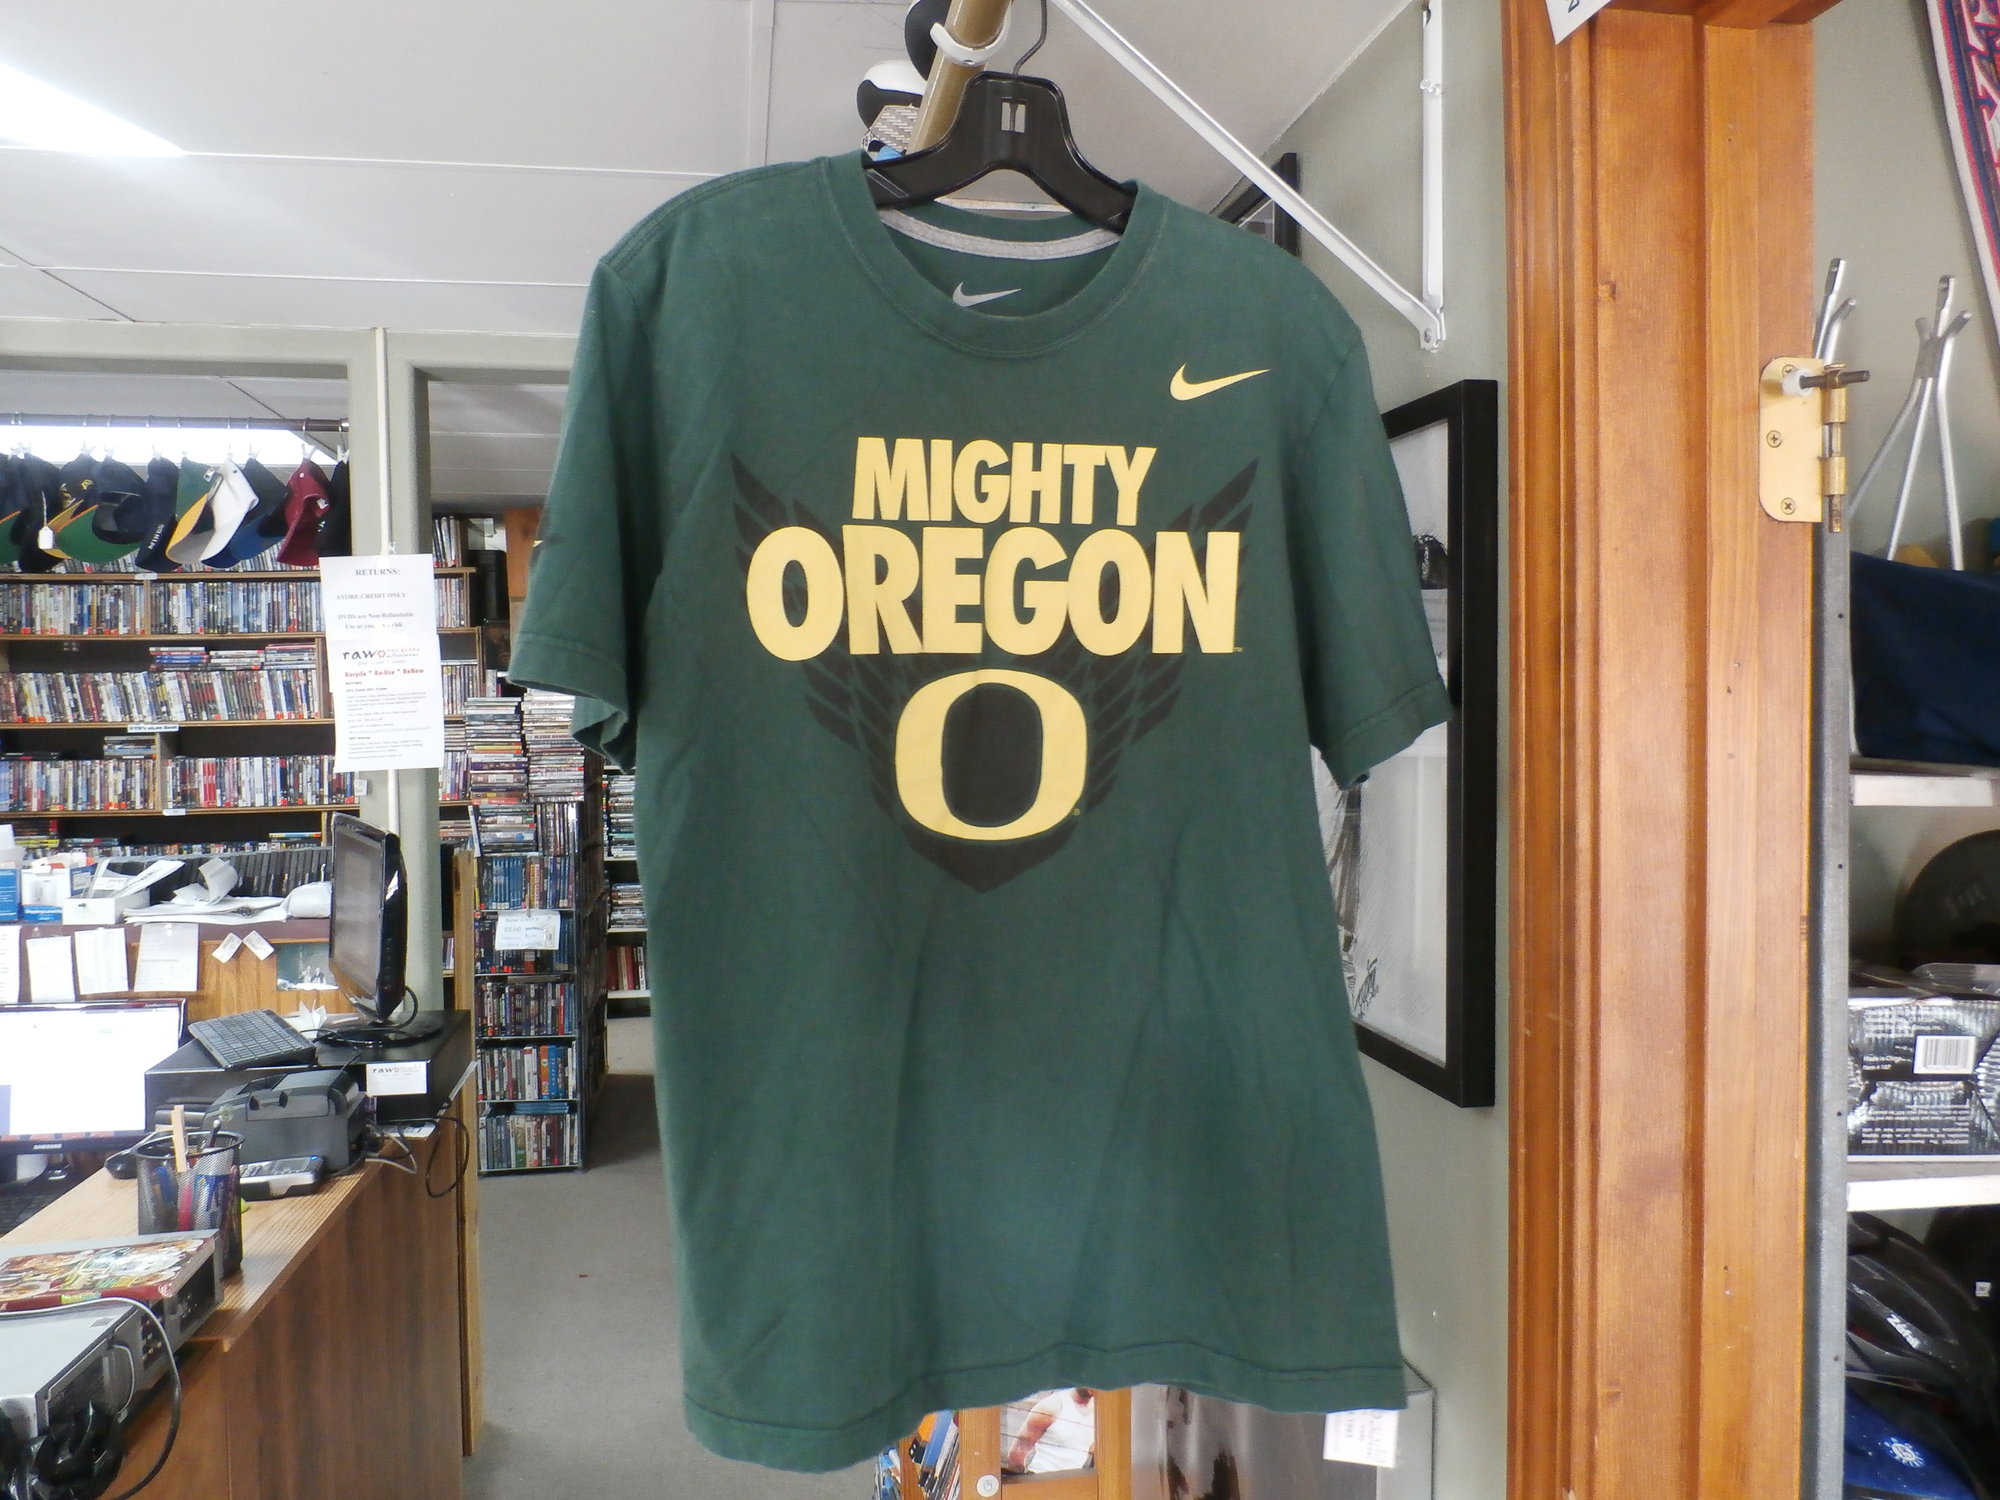 Green Oregon Mighty Ducks Short Sleeve Nike T-shirt # 17014
Rating: (see below)- 3- Good condition
Team: Oregon Mighty Ducks
Player: n/a
Brand: Nike
Size: Medium- Men's(Measured Flat: Across chest 19.5\"; Length 26.5\")
Measured flat: under arm to under arm; top of shoulder to the hem
Color:  Green
Material: - 100% Cotton
Style: Short Sleeve
Condition: -   3- Good condition,Good condition: wrinkled; material looks and feels great; some pilling; some loose threads along bottom of shirt; No rips or holes;(SEE PHOTOS).
Shipping: $3.37
Item # 17014